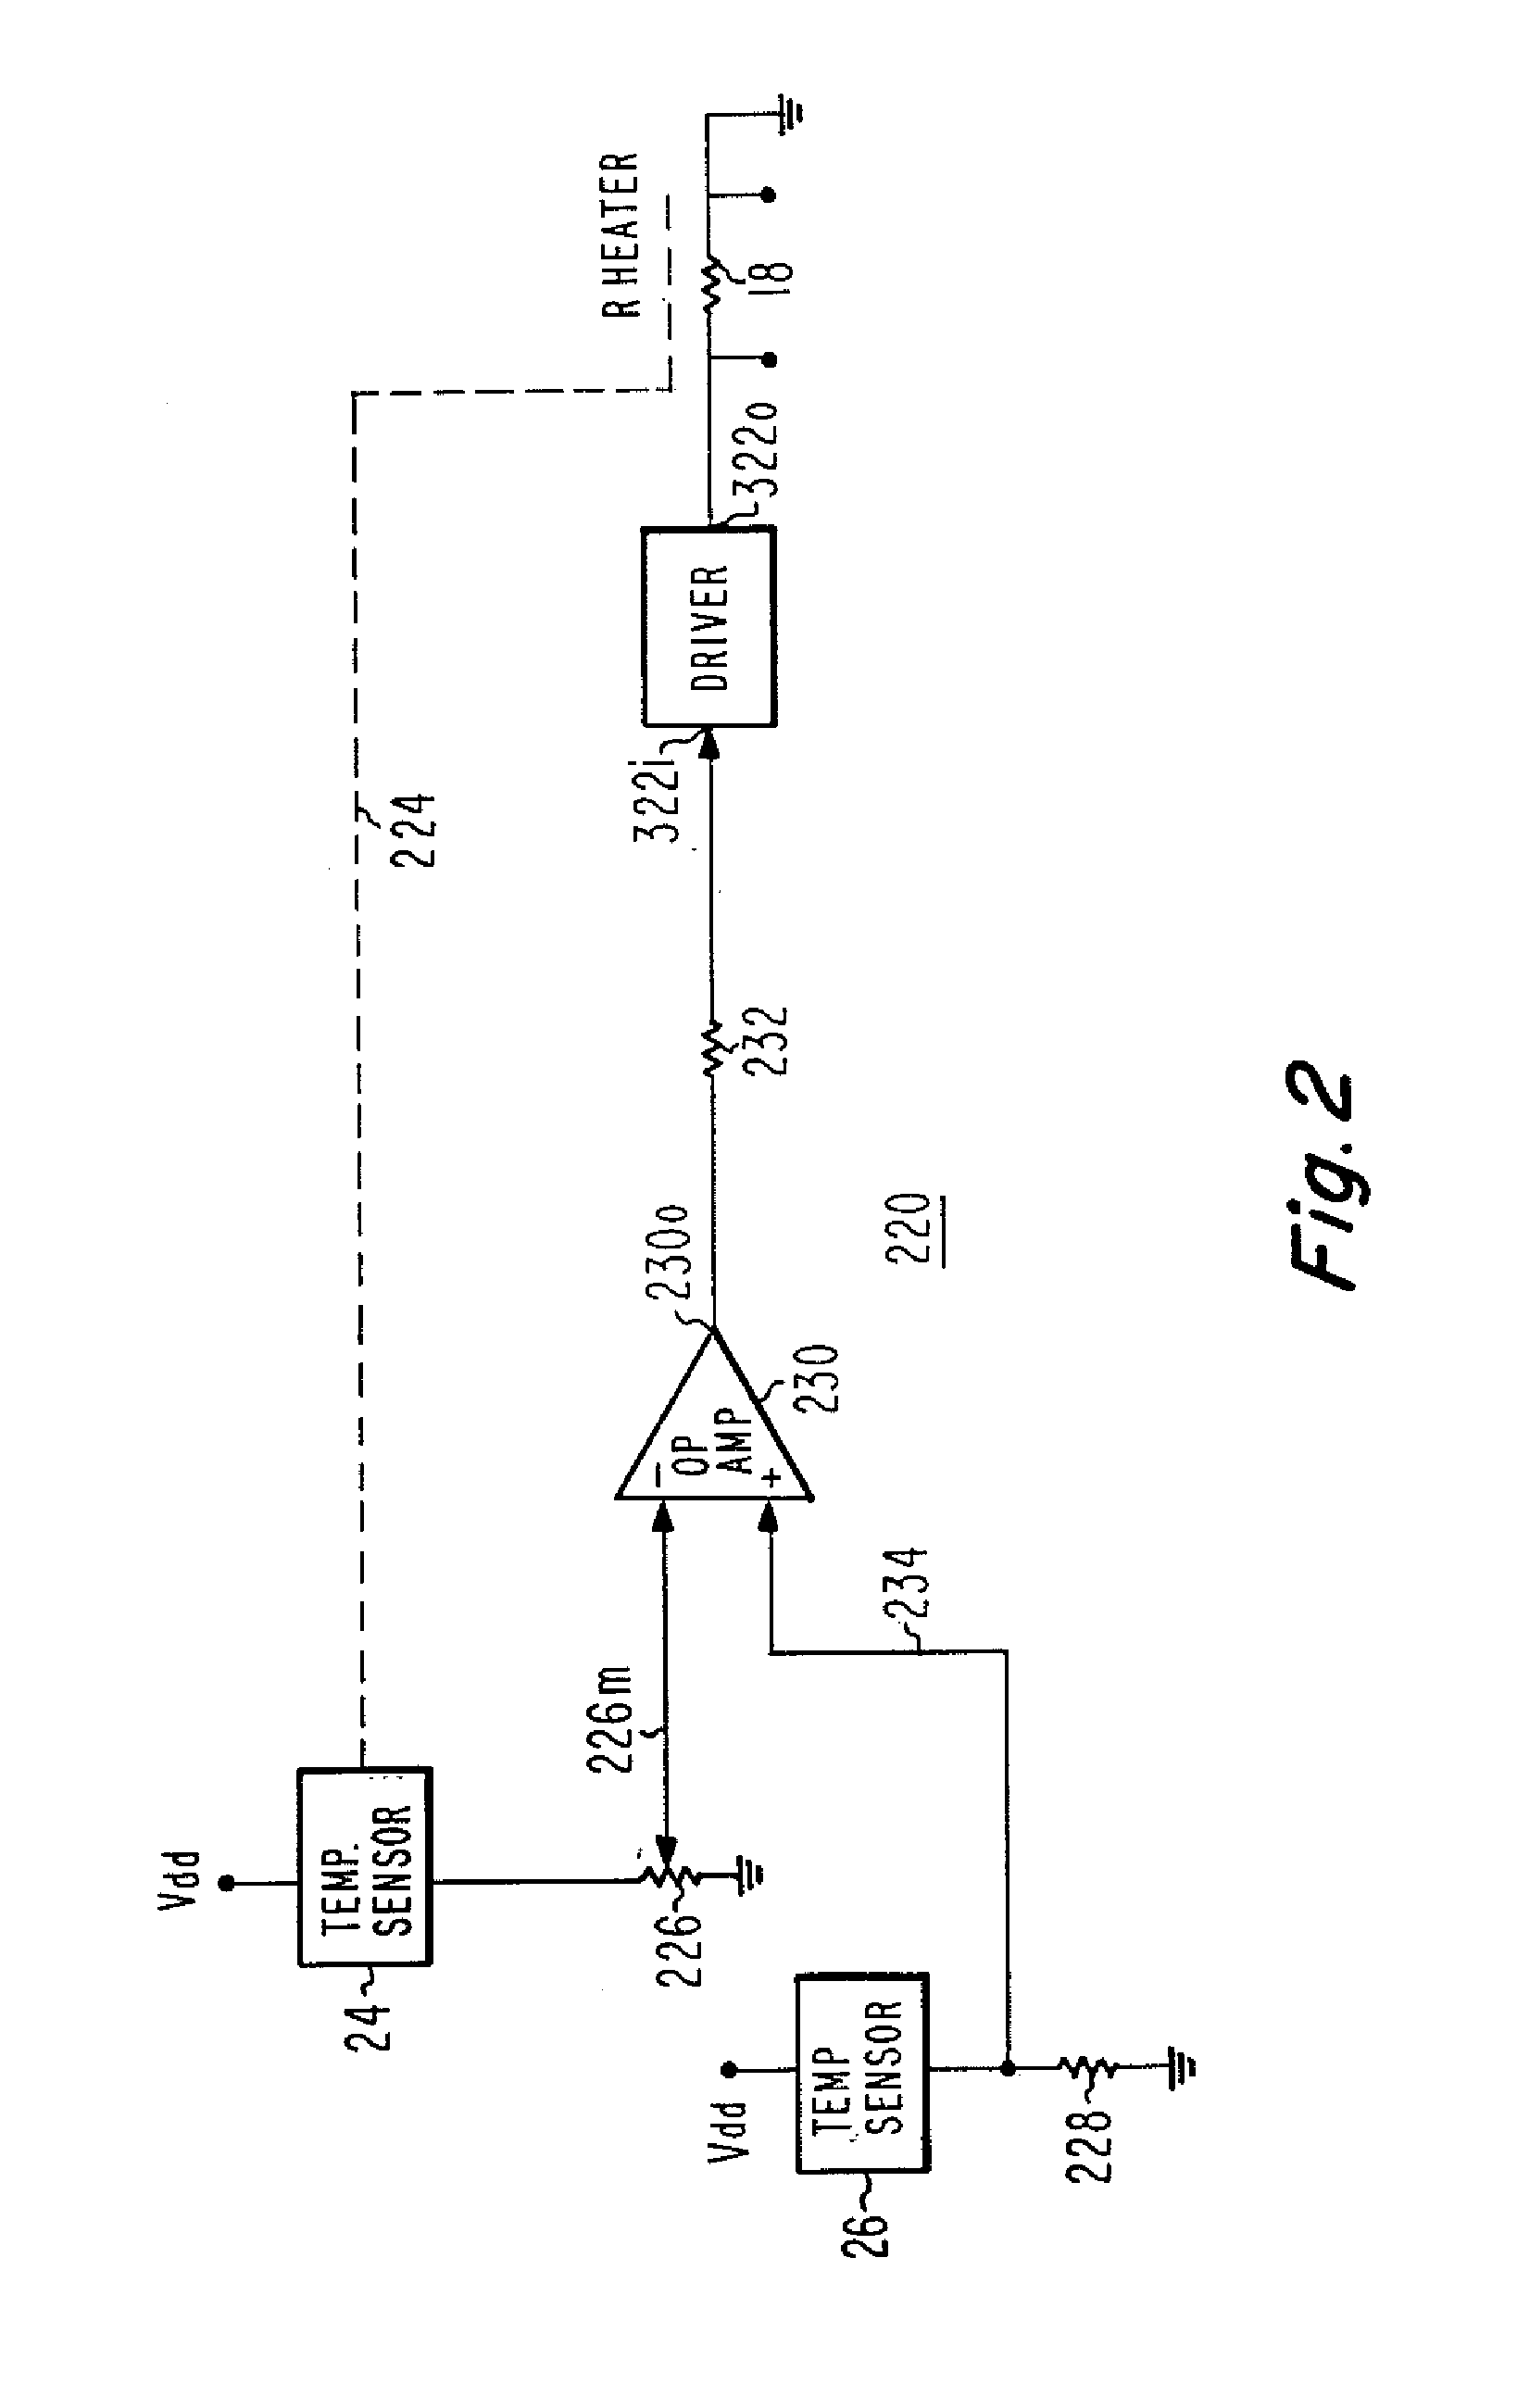 Constant-temperature-difference flow sensor, and integrated flow, temperature, and pressure sensor